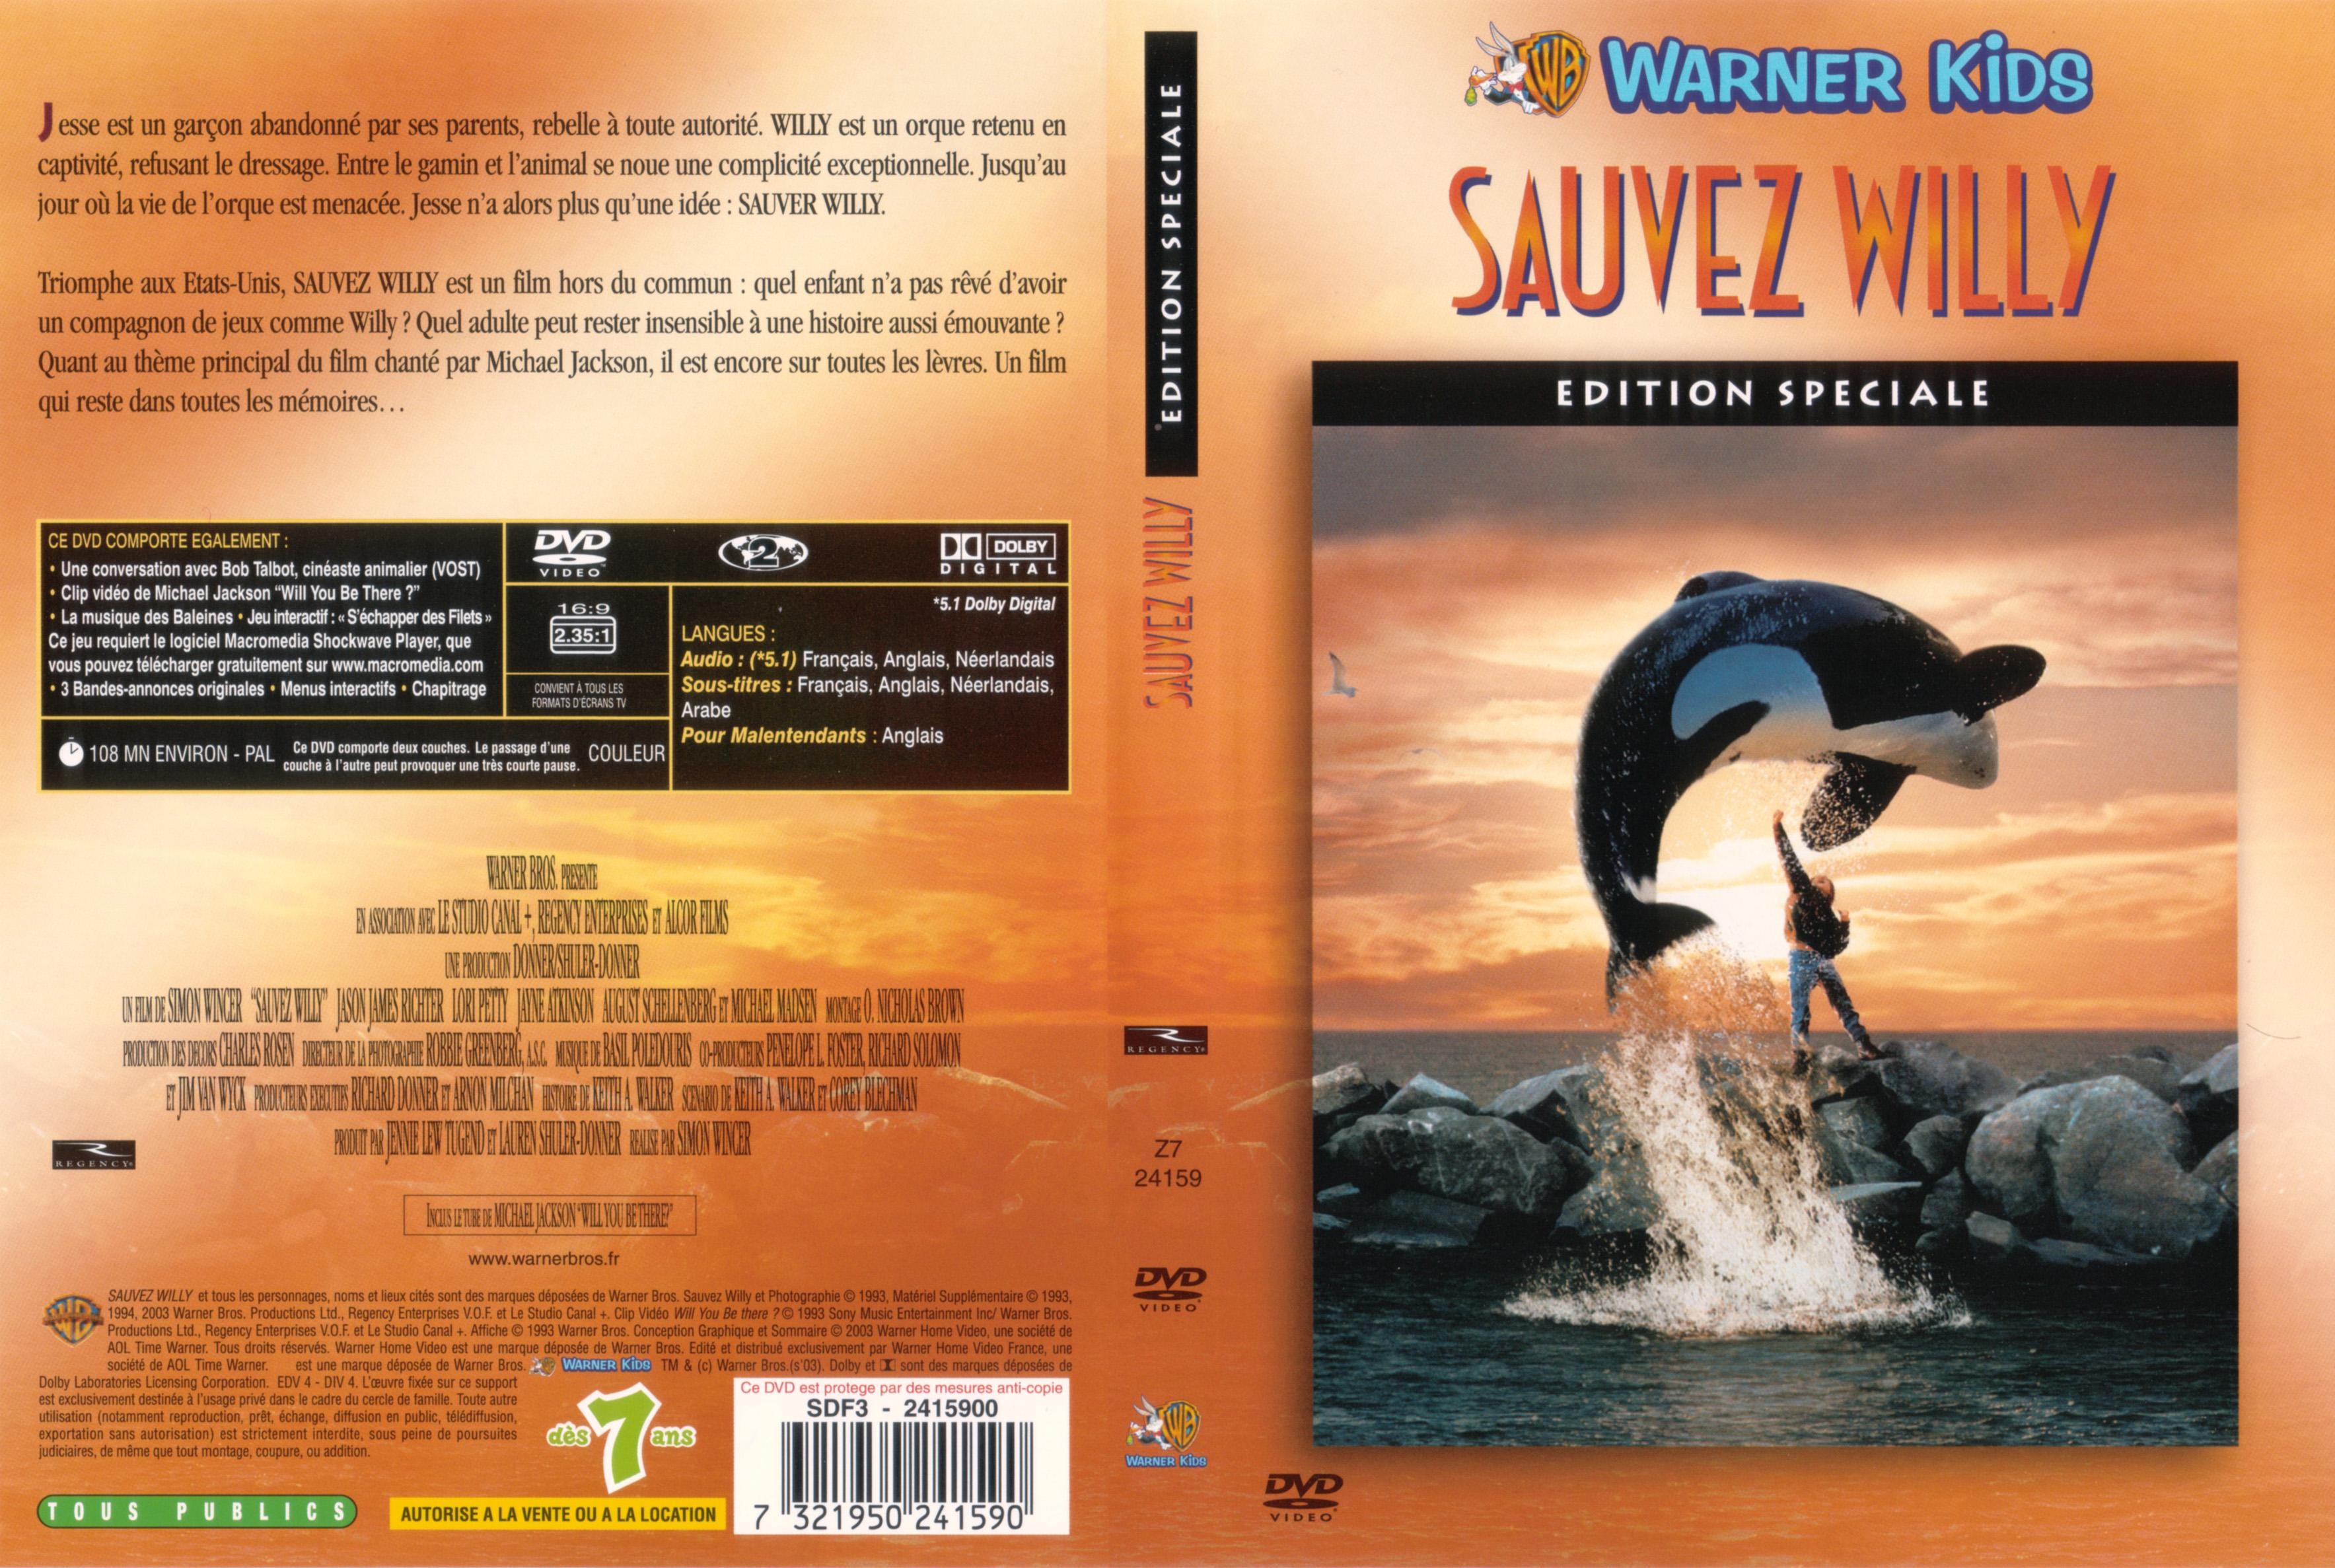 Jaquette DVD Sauvez Willy